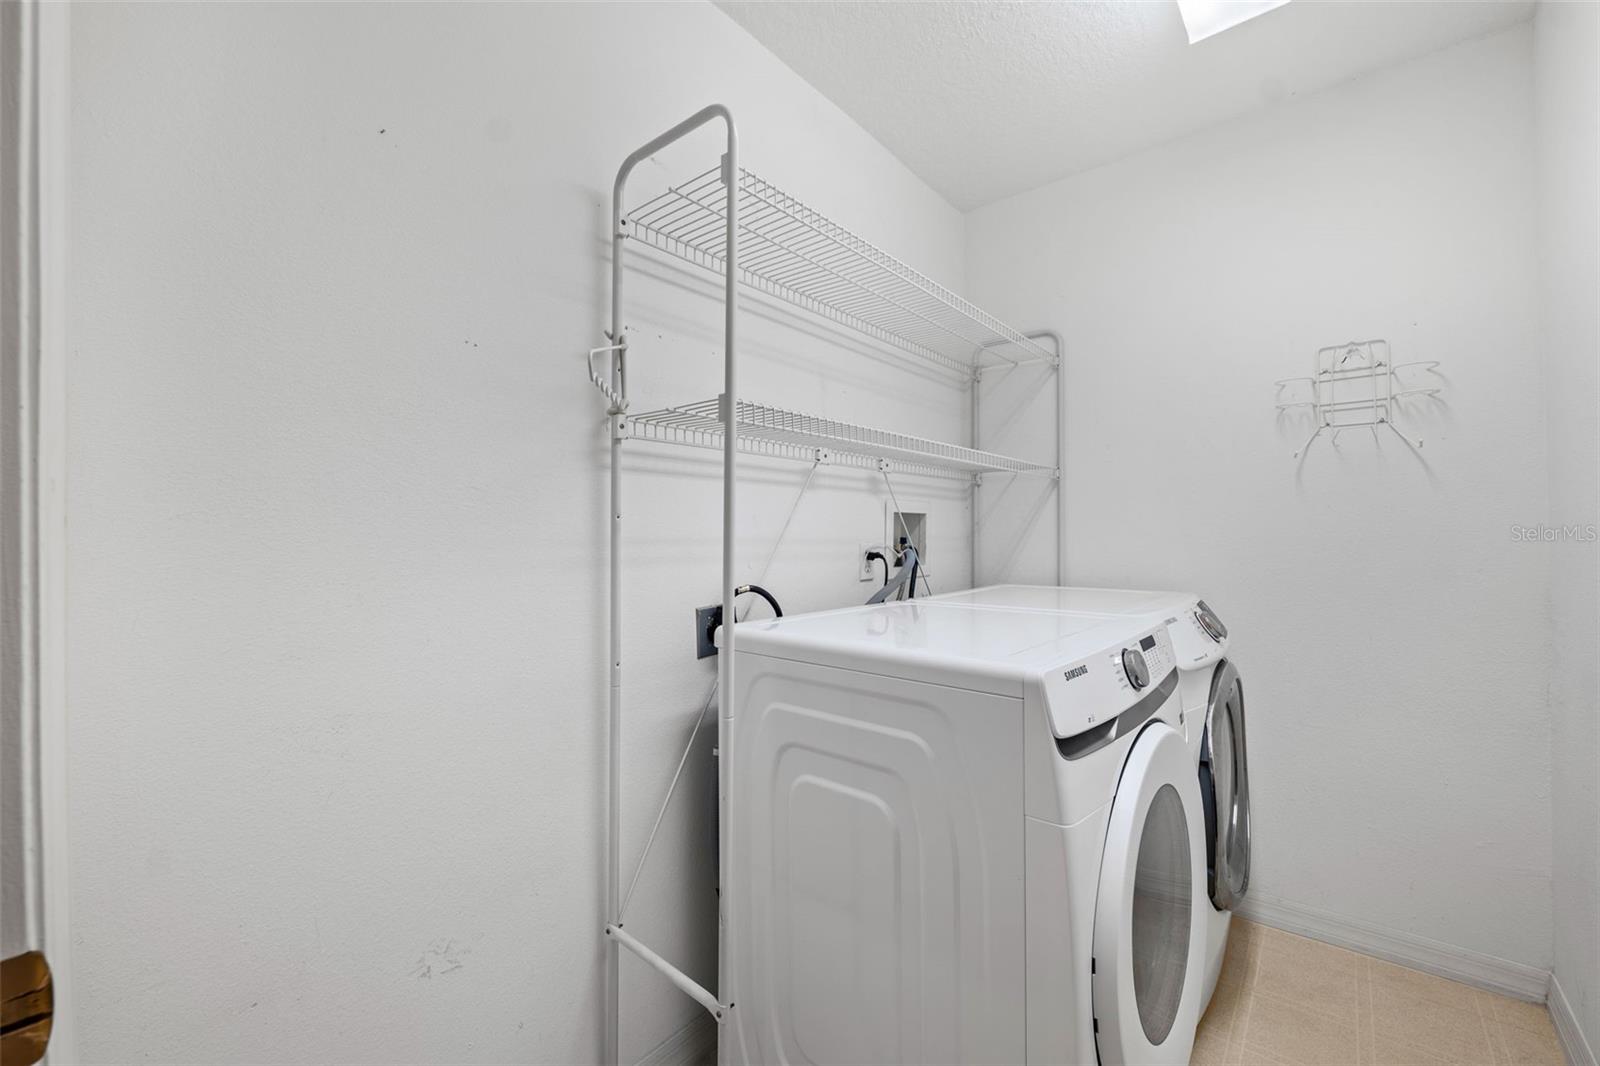 upstairs laundry room for extra convenience